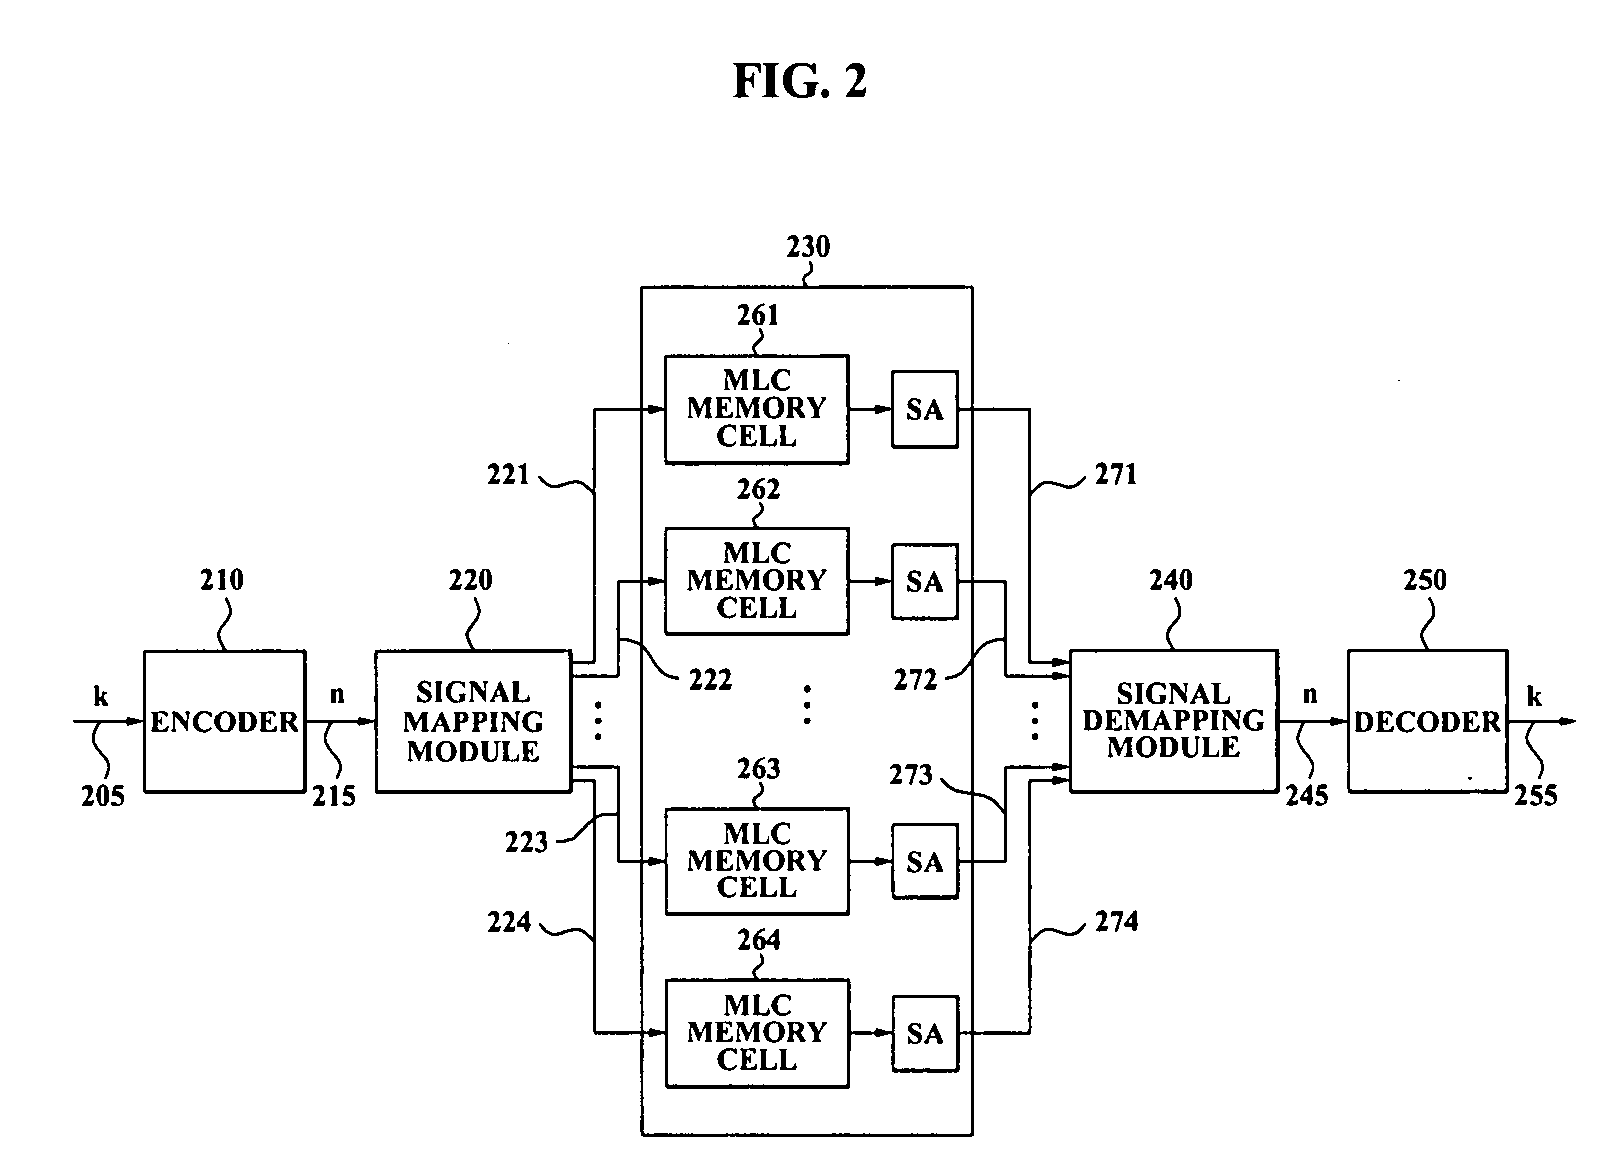 Multi-level cell memory devices and methods of storing data in and reading data from the memory devices